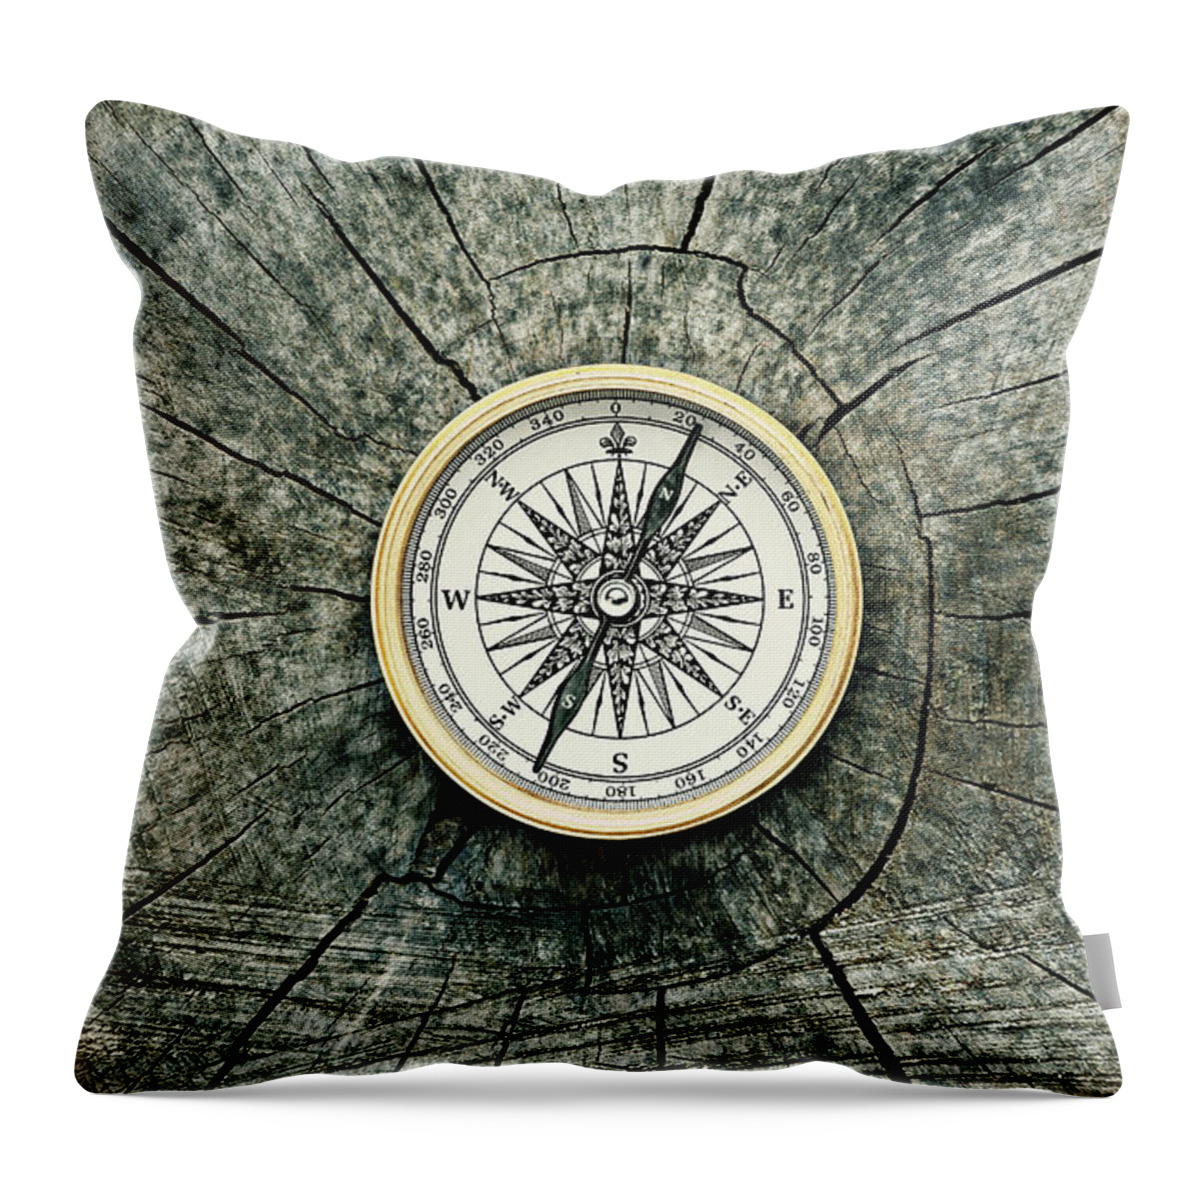 Two Objects Throw Pillow featuring the photograph Compass On A Tree Rings by David Muir